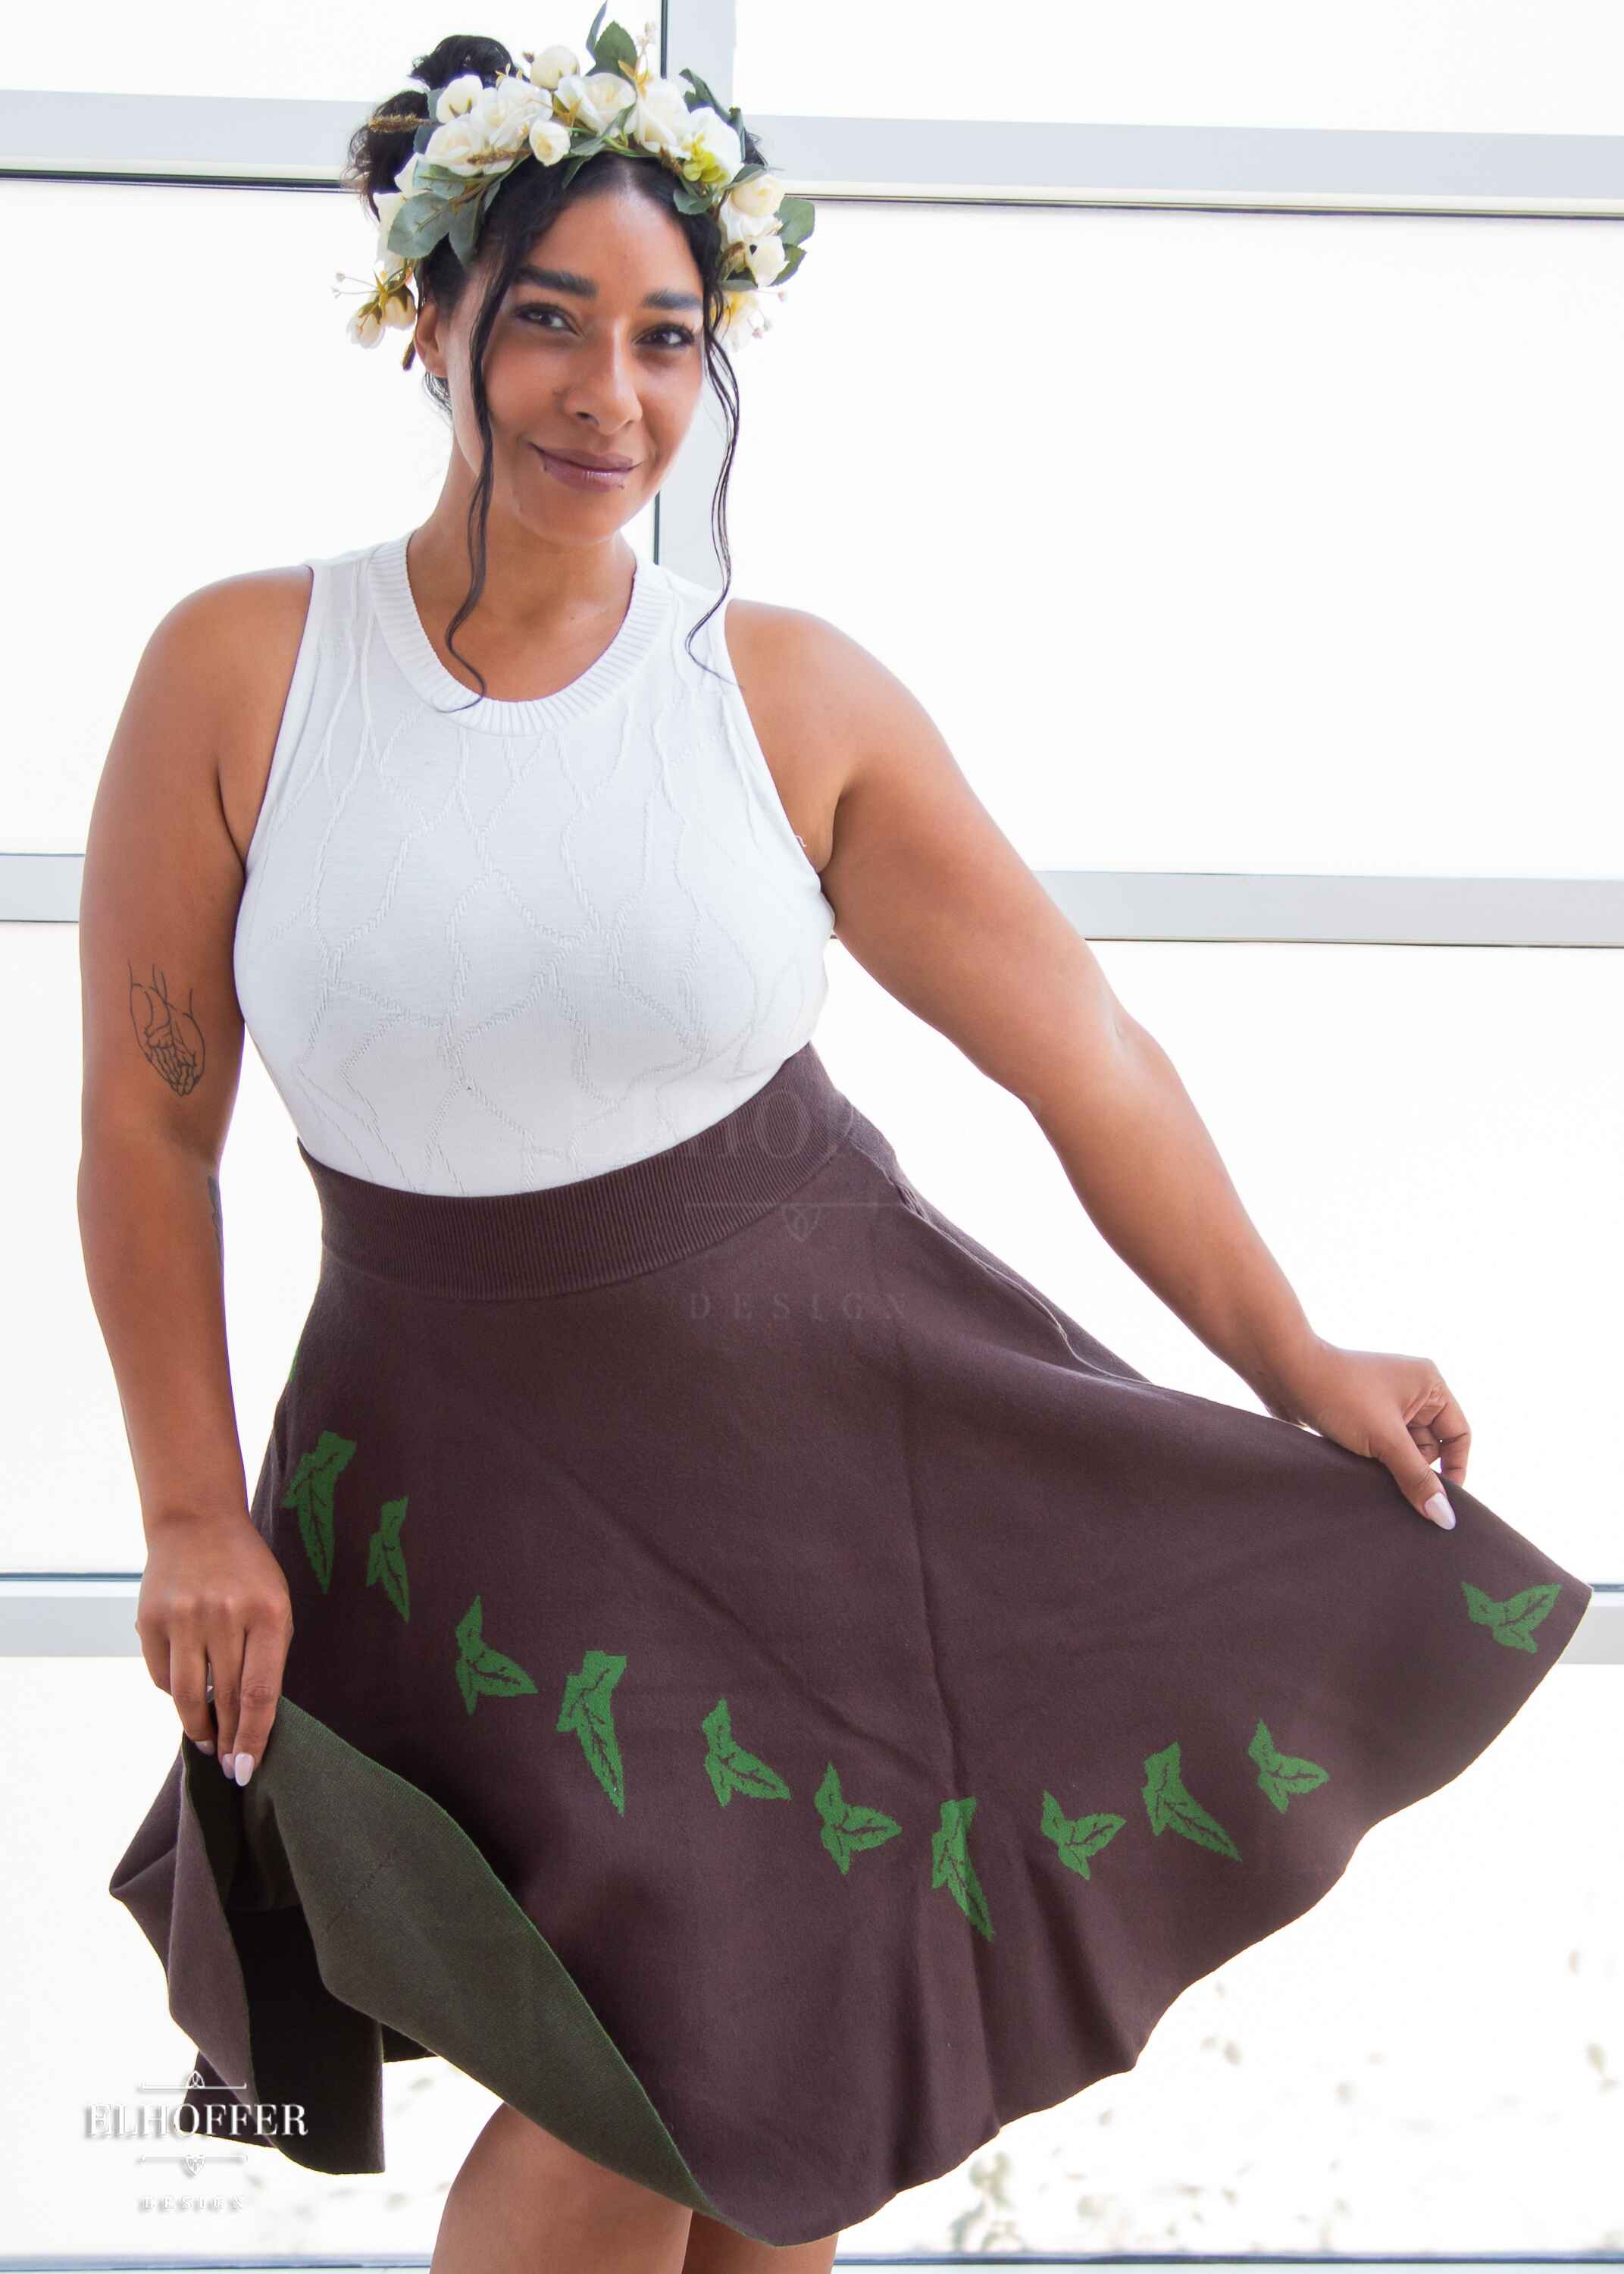 Janae, a light brown skinned L model with dark brown hair in an updo, is wearing a brown knit skirt that hits just passed the knee and has a cascading green leaf design and a white knit crop top with a butterly wing texture...